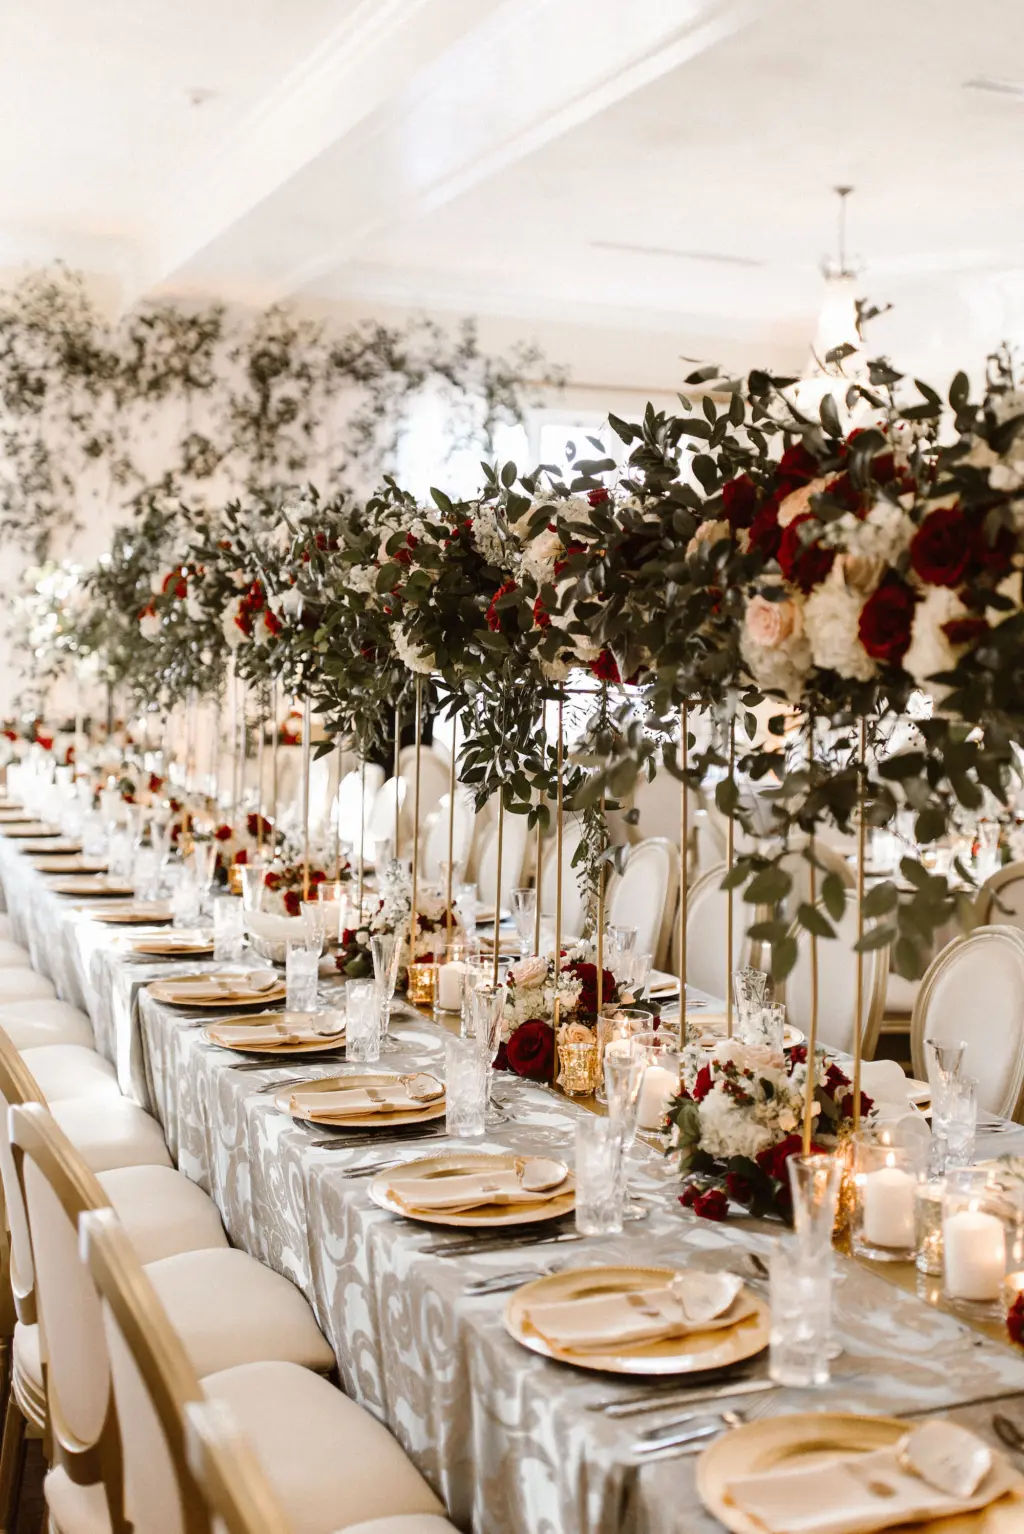 Tall Gold Flower Stand with Cascading Greenery, Burgundy, White, and Blush Rose Centerpiece Inspiration | Gold Chargers and Long Feasting Table for Wedding Reception | Tampa Bay Planner Unique Weddings and Events